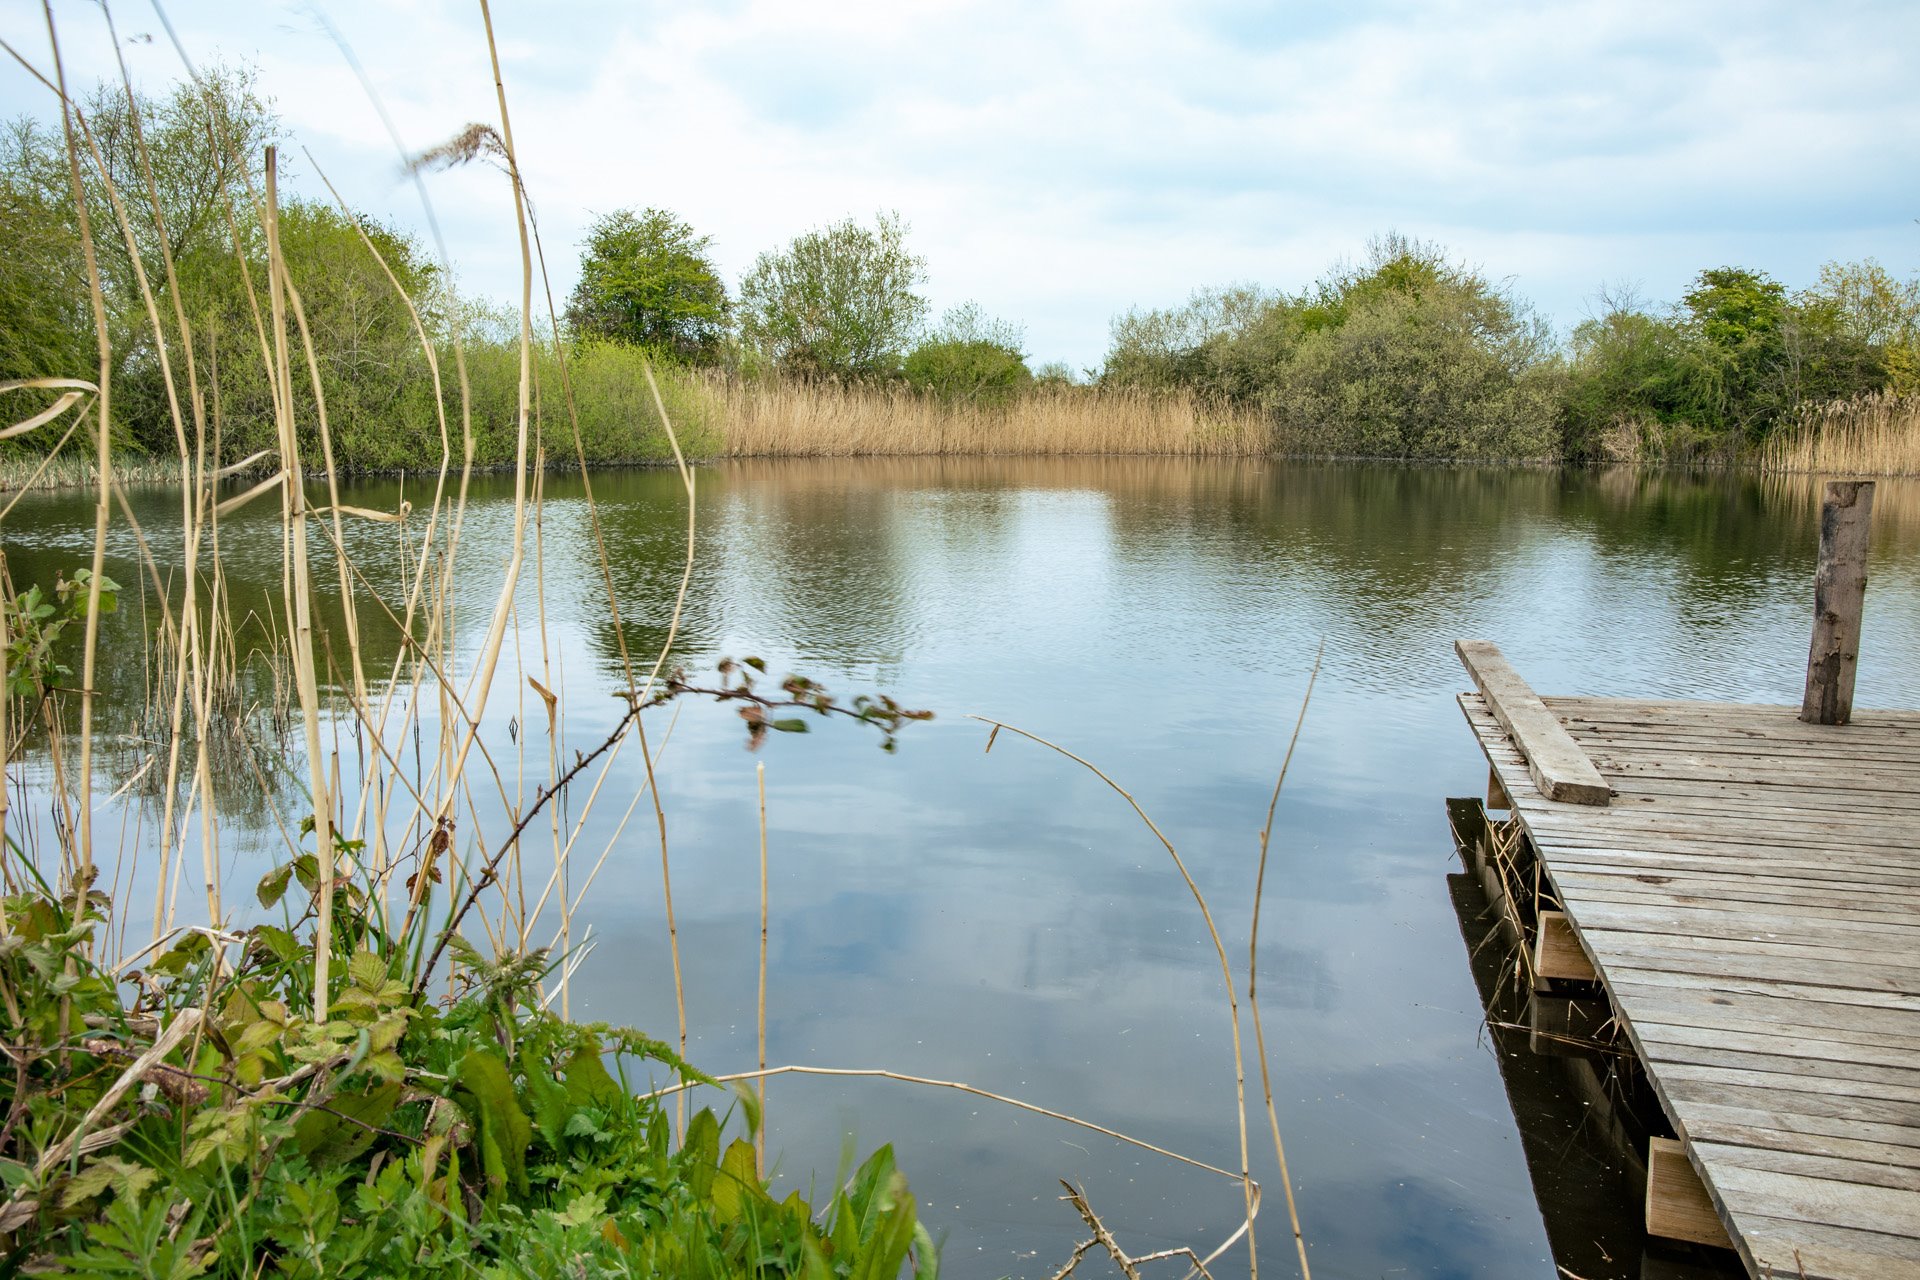 Wild swimming lake at Elmore court in the cotswolds is used as part of their luxury wellness retreats